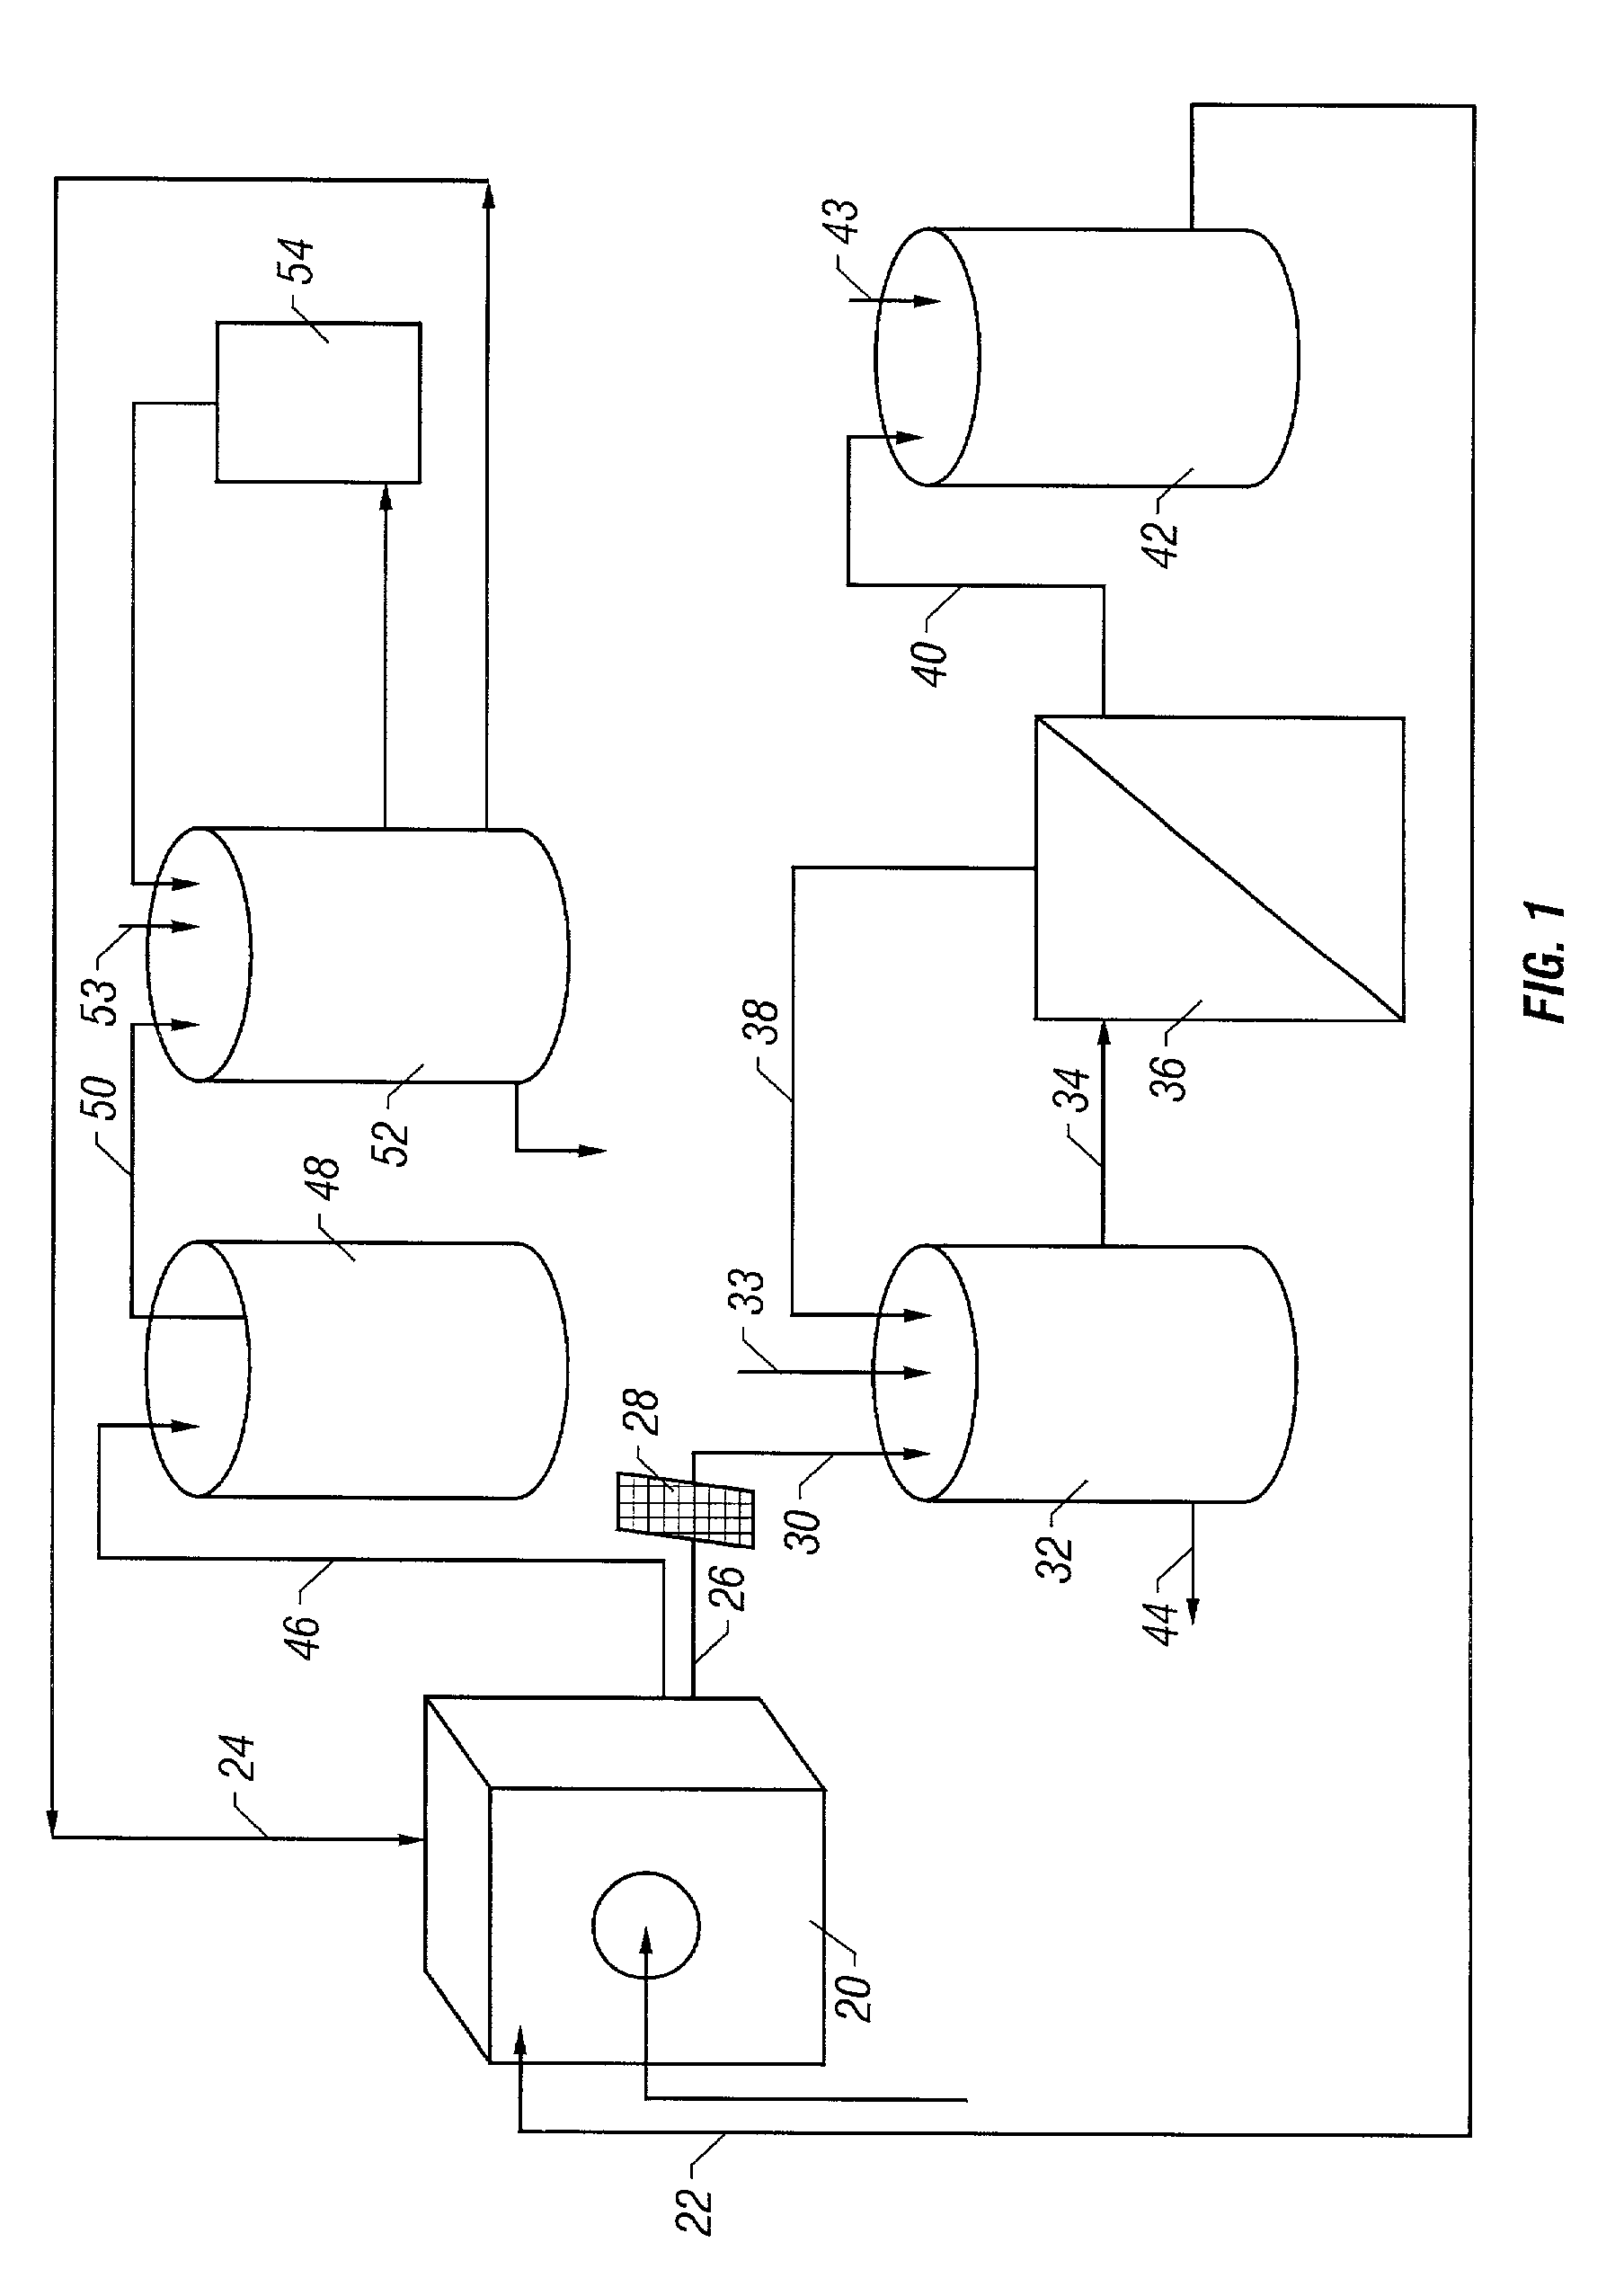 System and method for economically viable and environmentally friendly central processing of home laundry